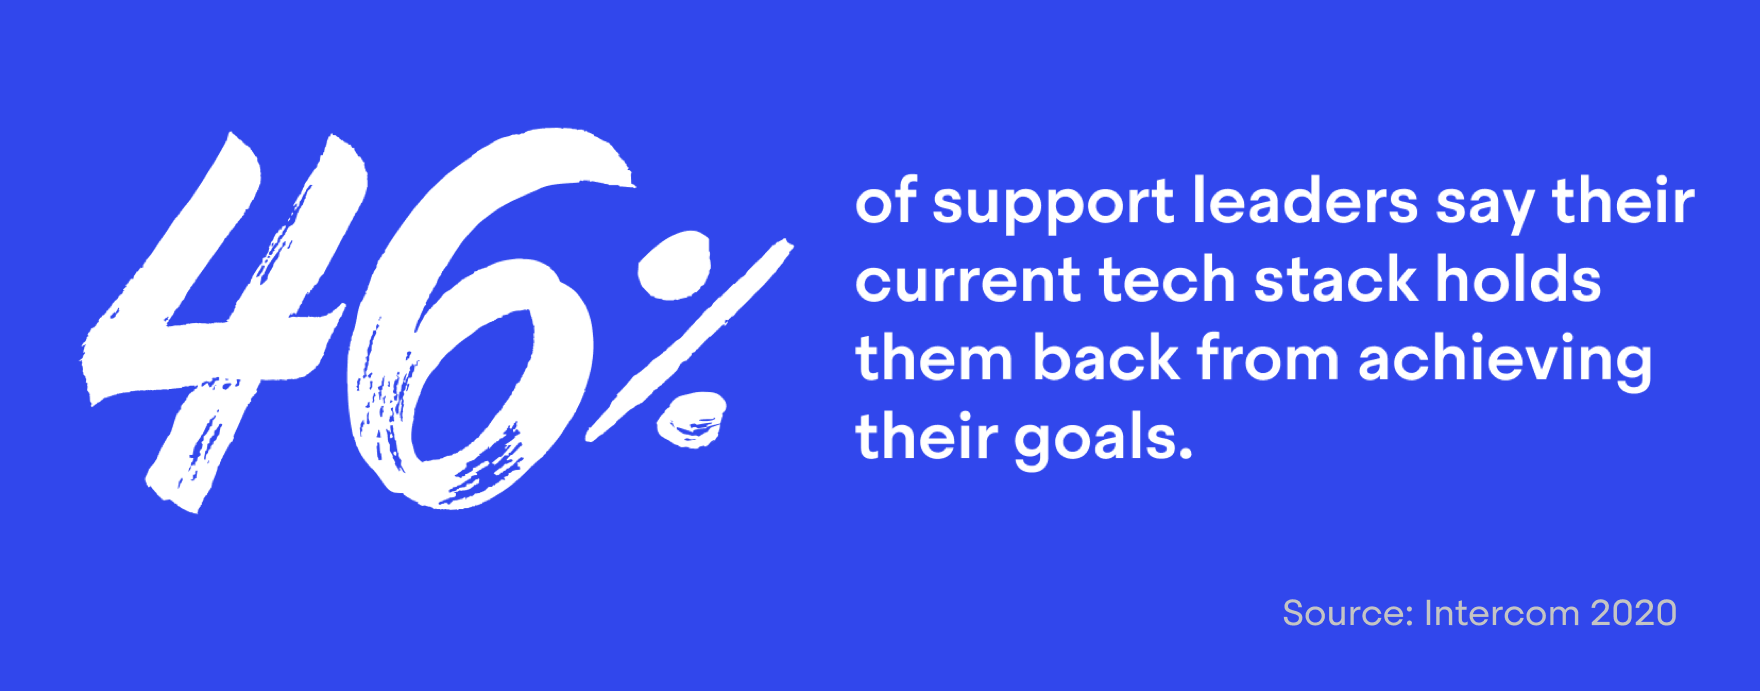 46% of support leaders believe their current tech stack holds them back from achieving their goals